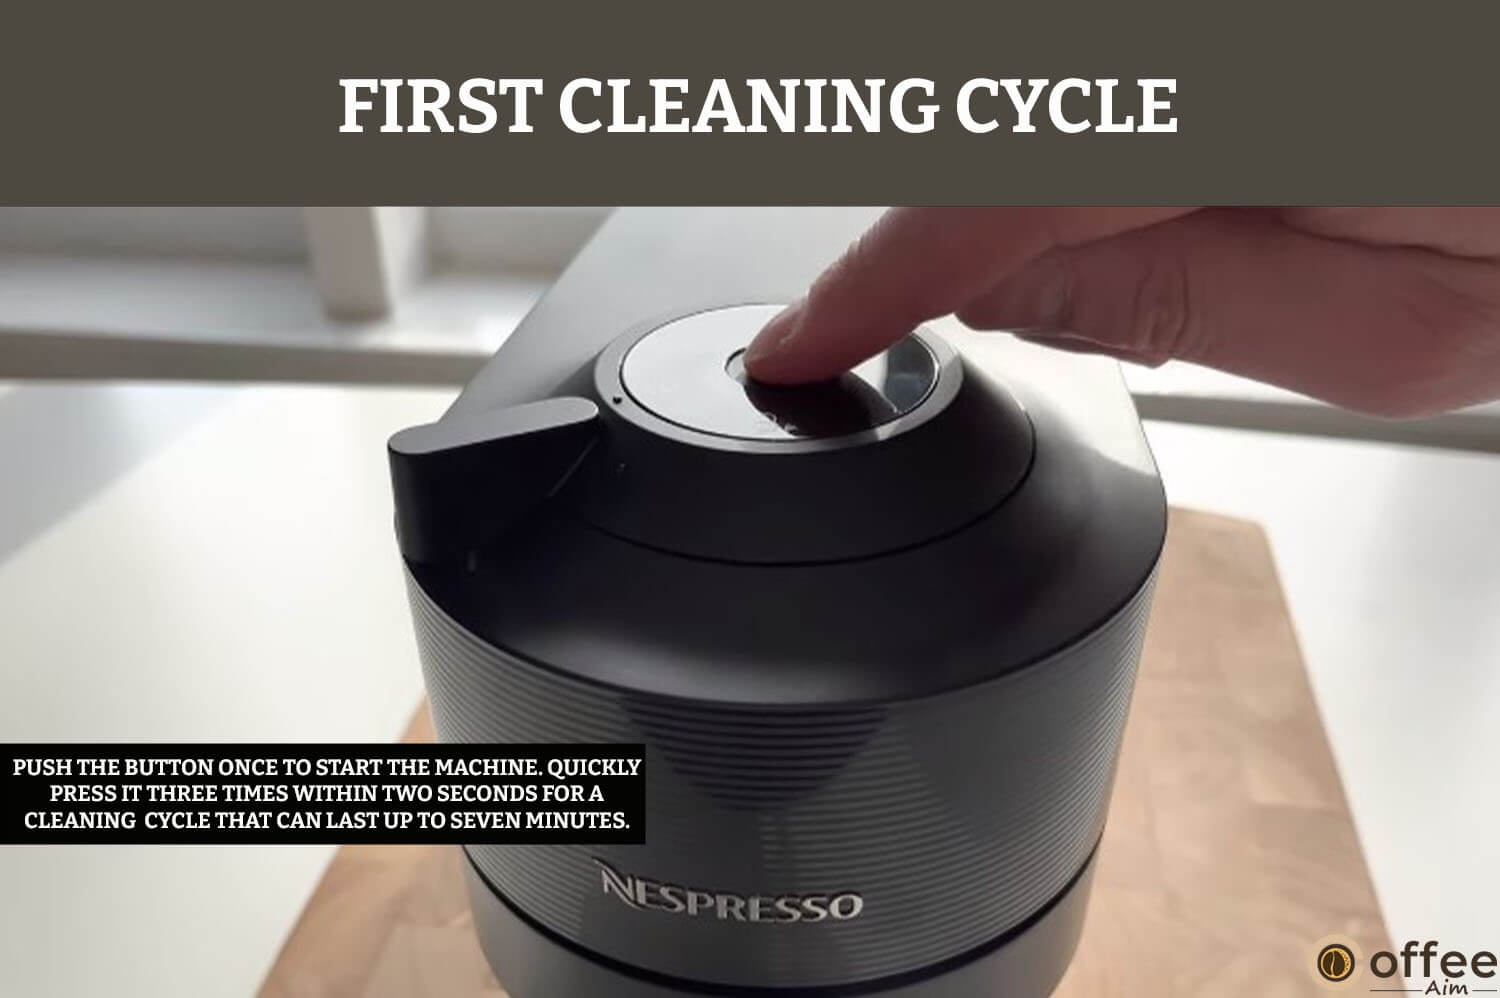 This image illustrates the process for initiating the 'First Cleaning Cycle' in the article 'Unboxing Nespresso Vertuo Pop+.' To begin, turn on the machine by pressing the button once, followed by three quick presses within two seconds. This action will activate the cleaning cycle, which may last for up to seven minutes.